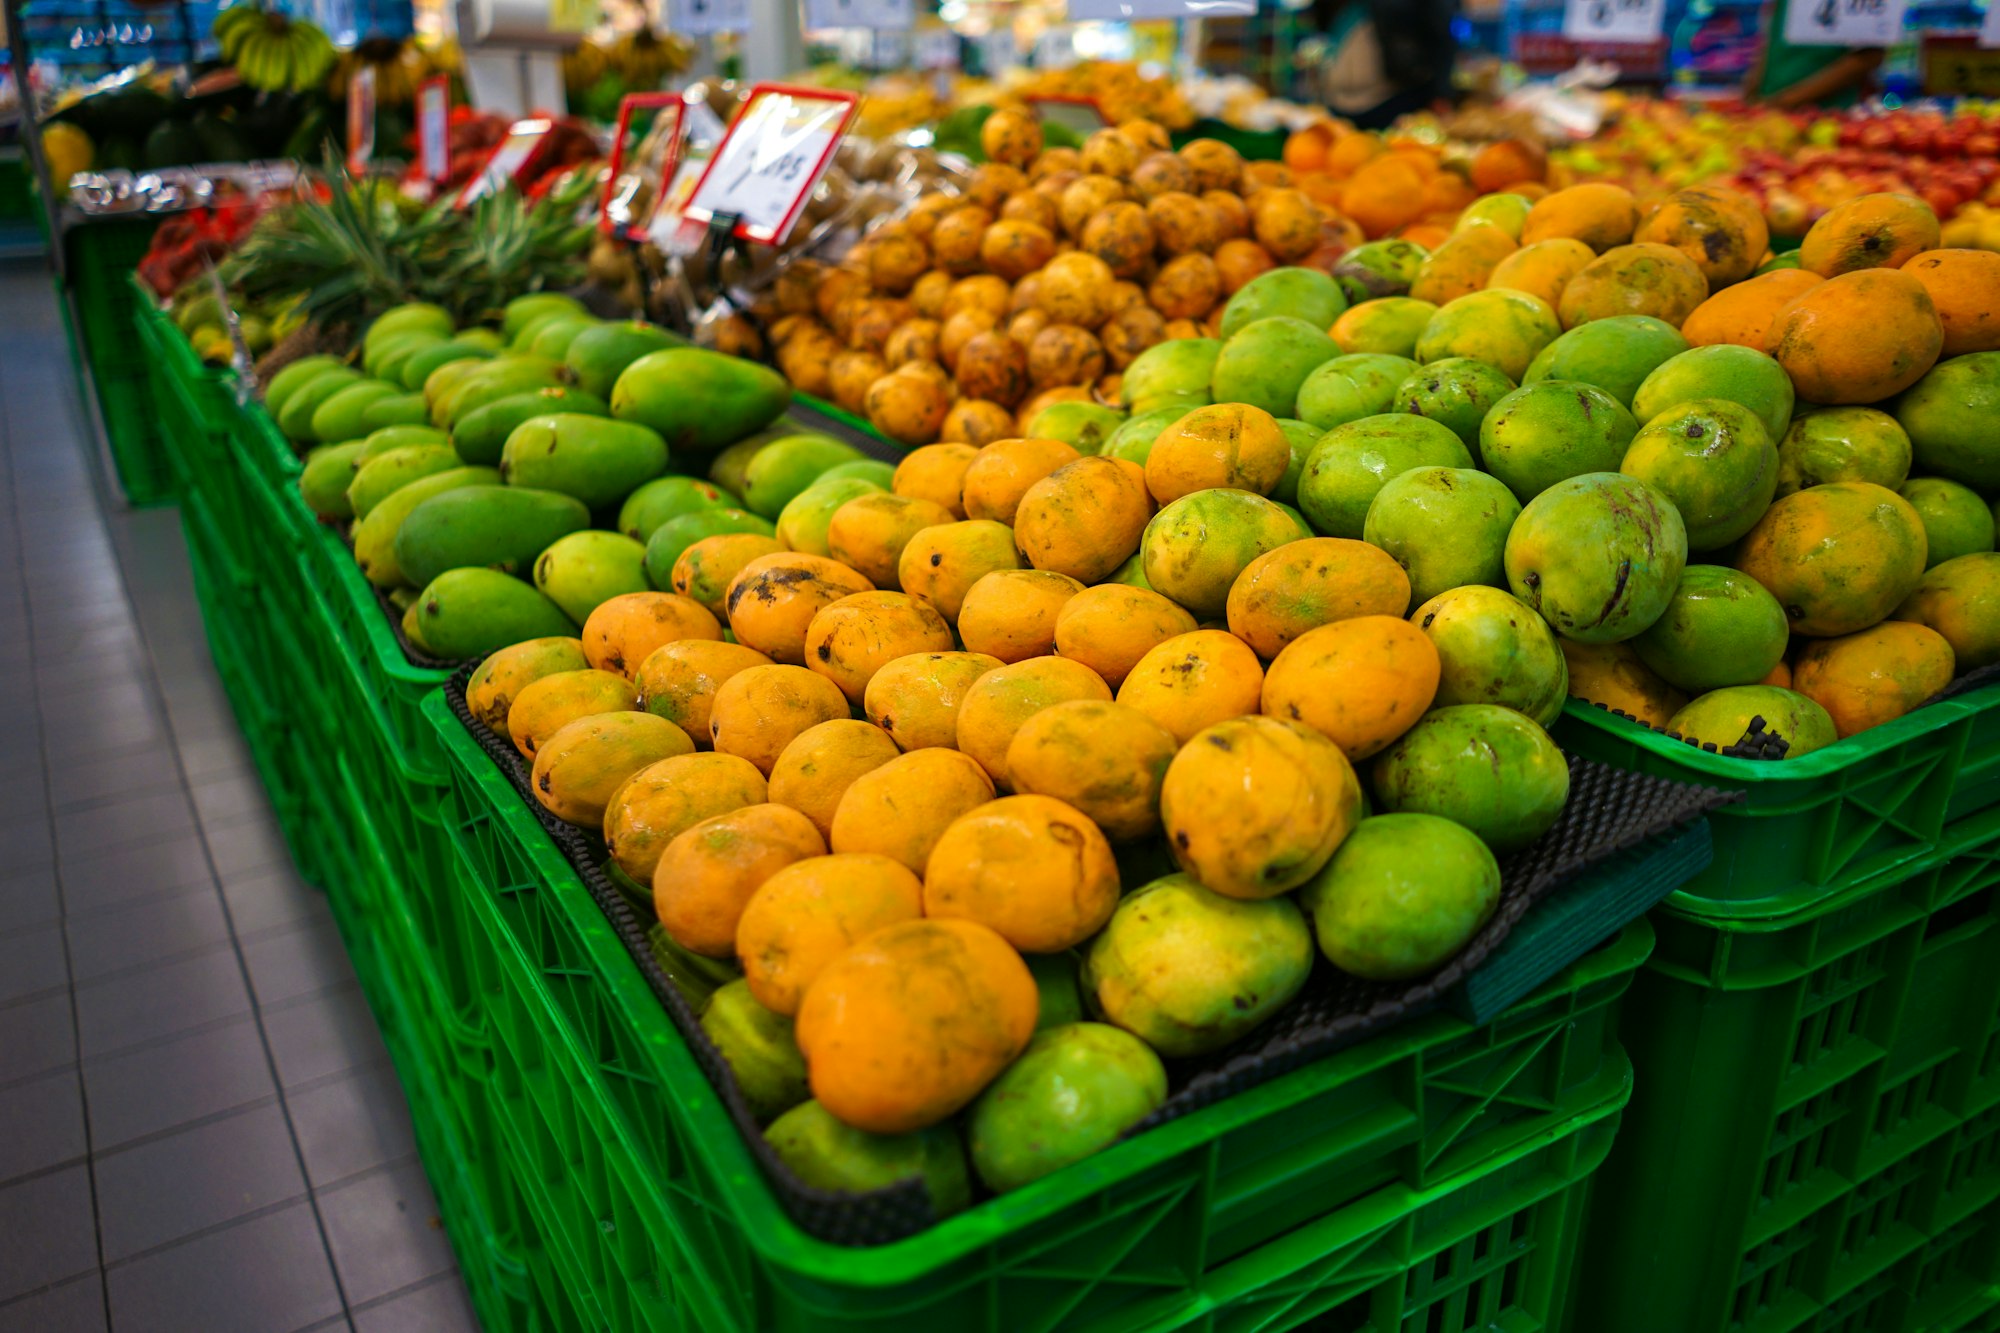 Fruit Stall at the supermarket